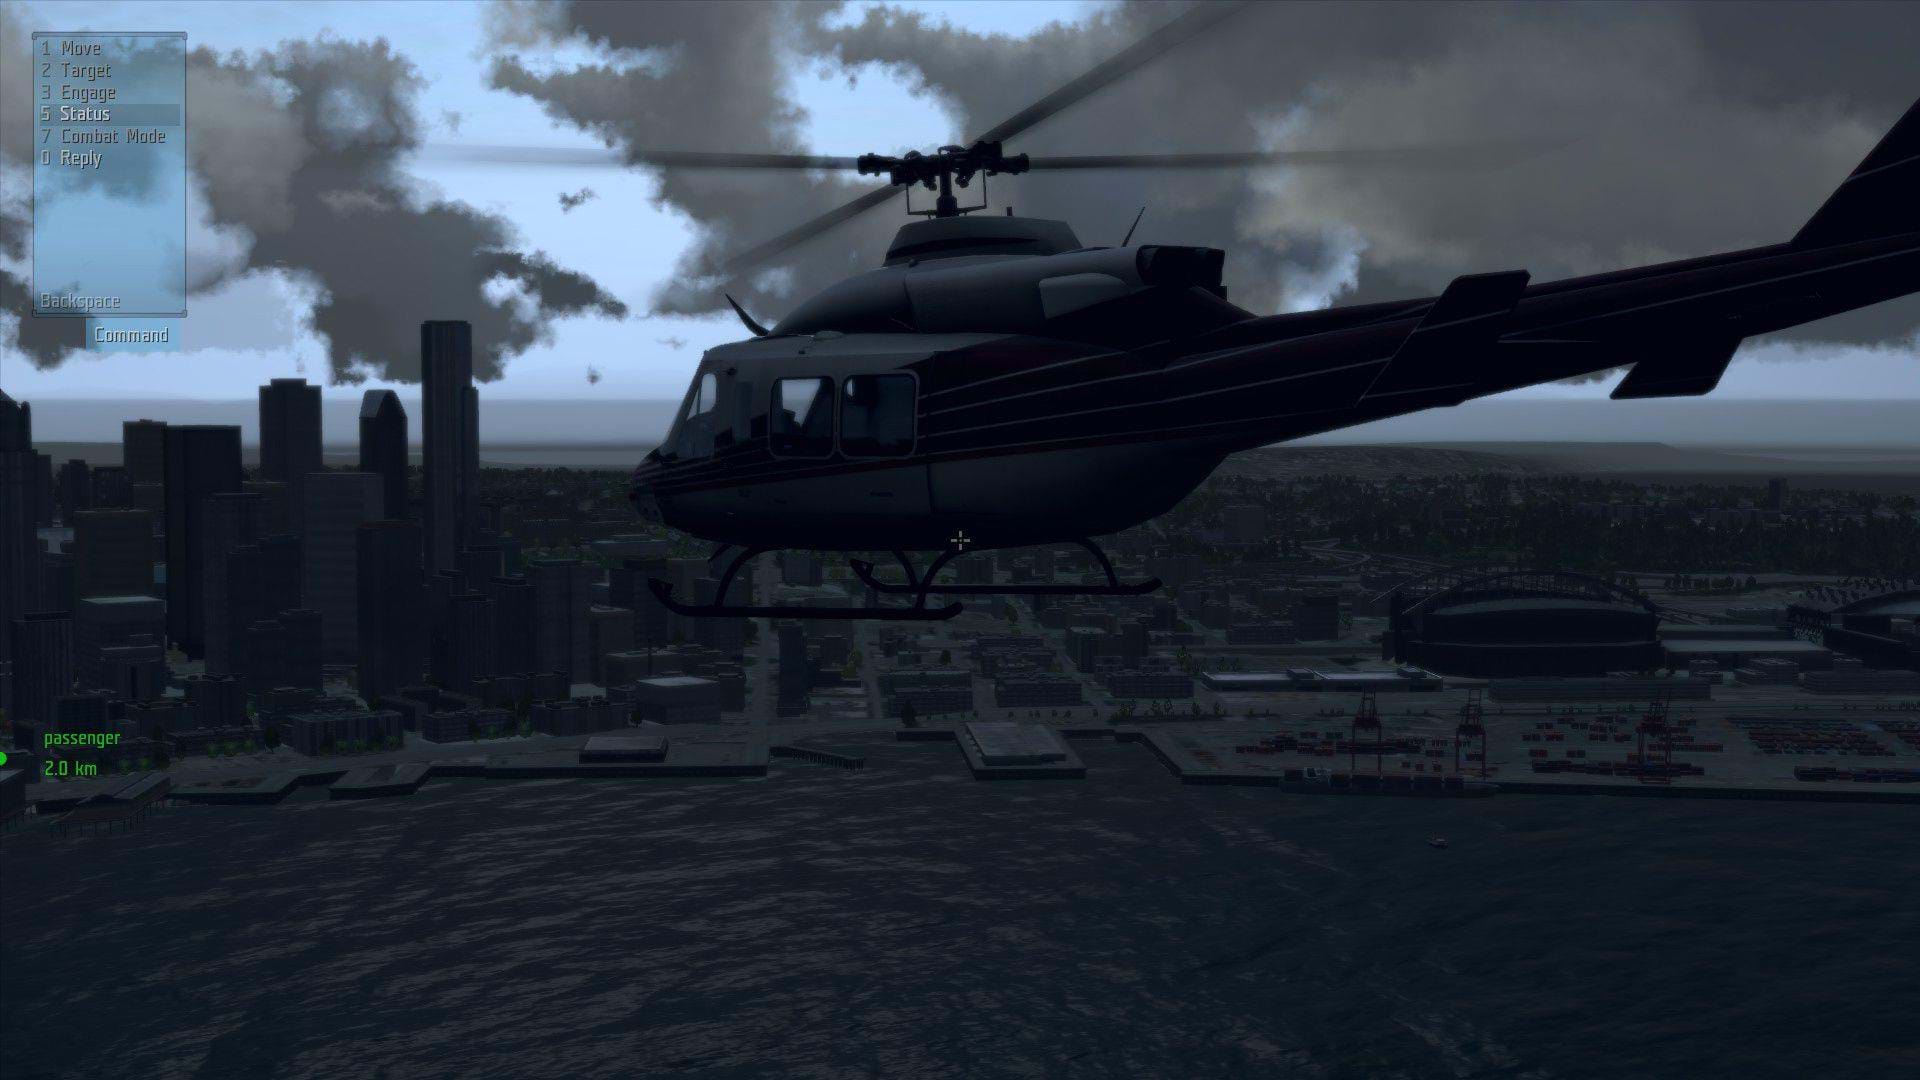 Take On Helicopters - screenshot by Sérgio Costa